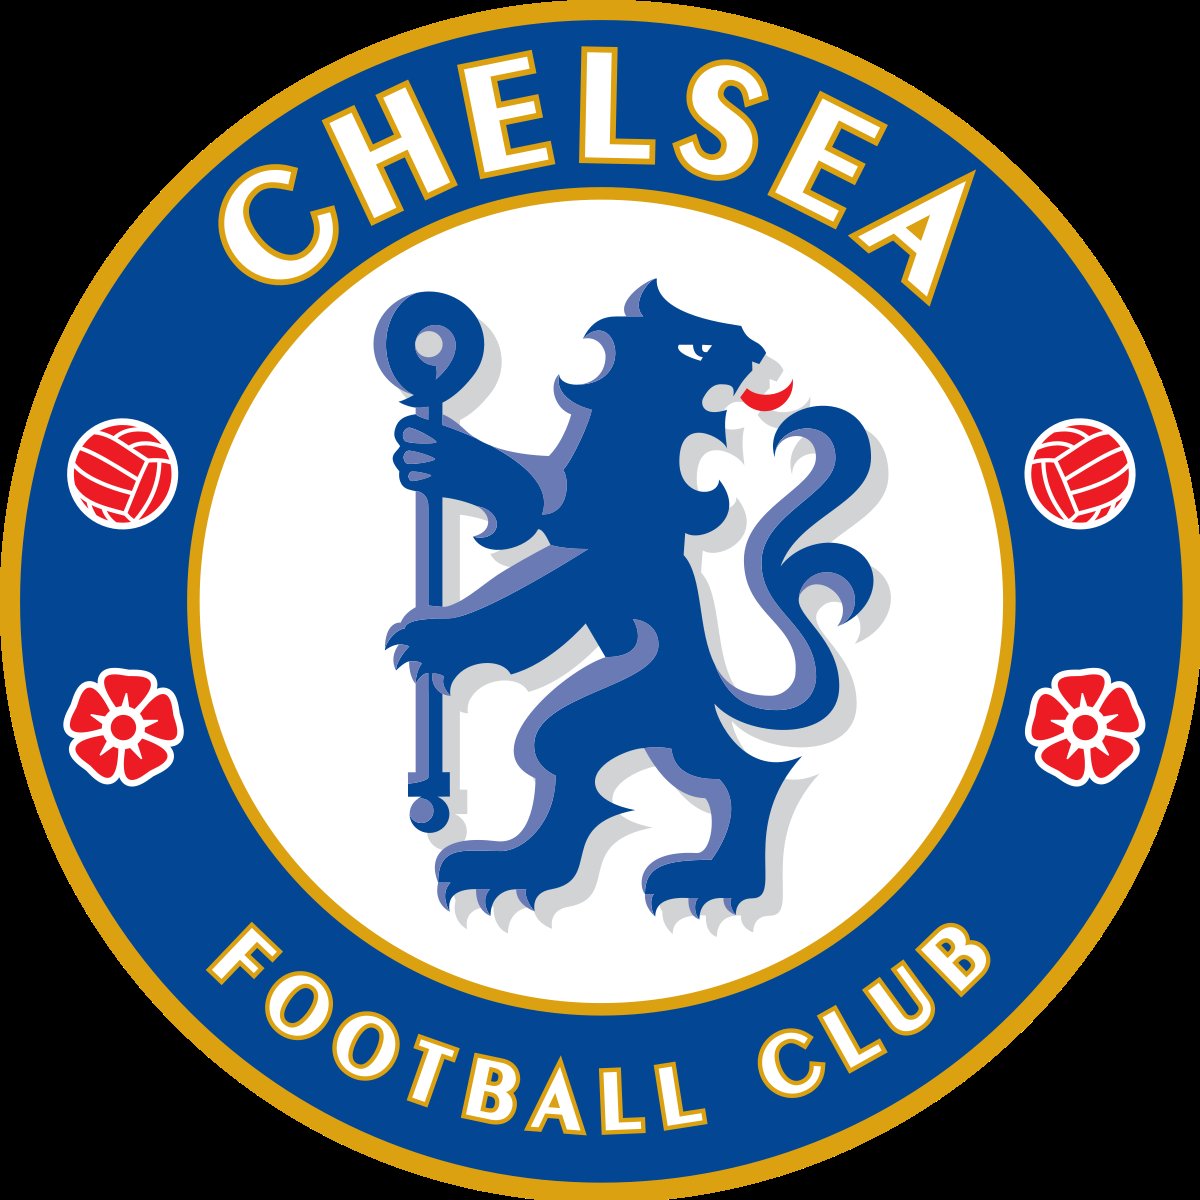 Dunno what say. New chelsea badge is just better